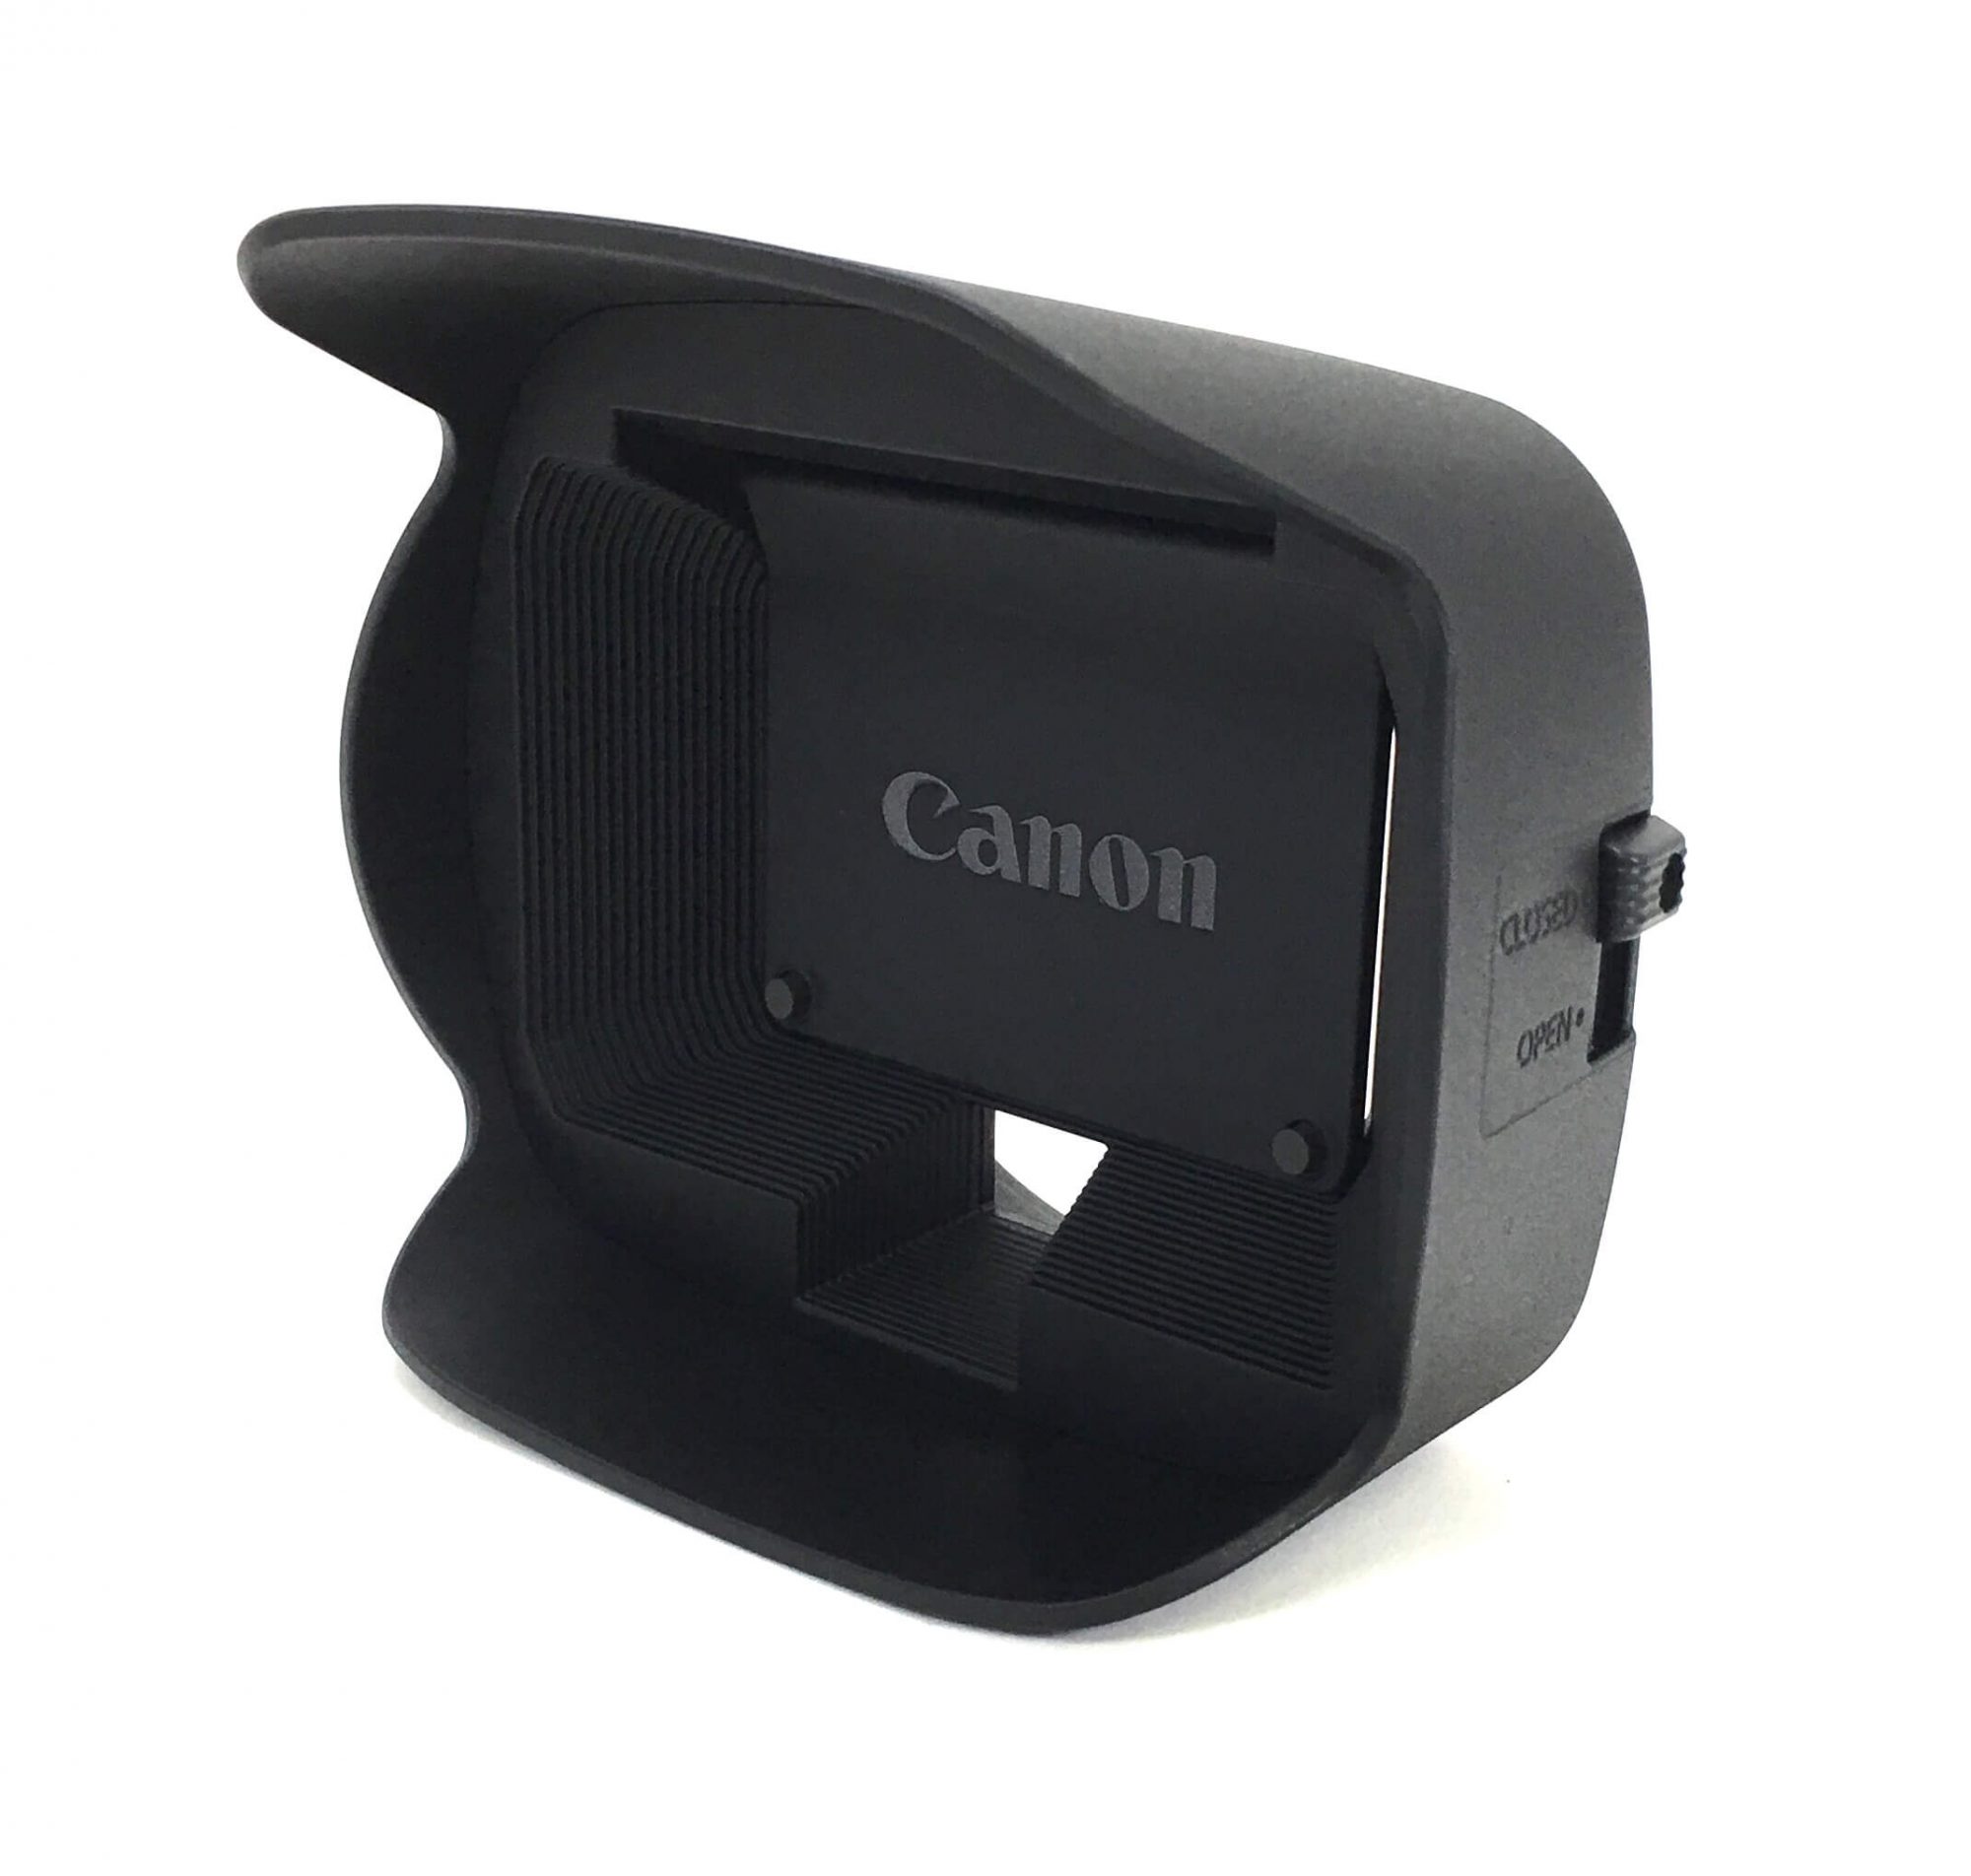 Original Lens Hood that fits on the the Canon XA20 camcorder. It is a genuine Canon part, sourced directly from Canon USA. Brand new factory fresh. Free Shipping.